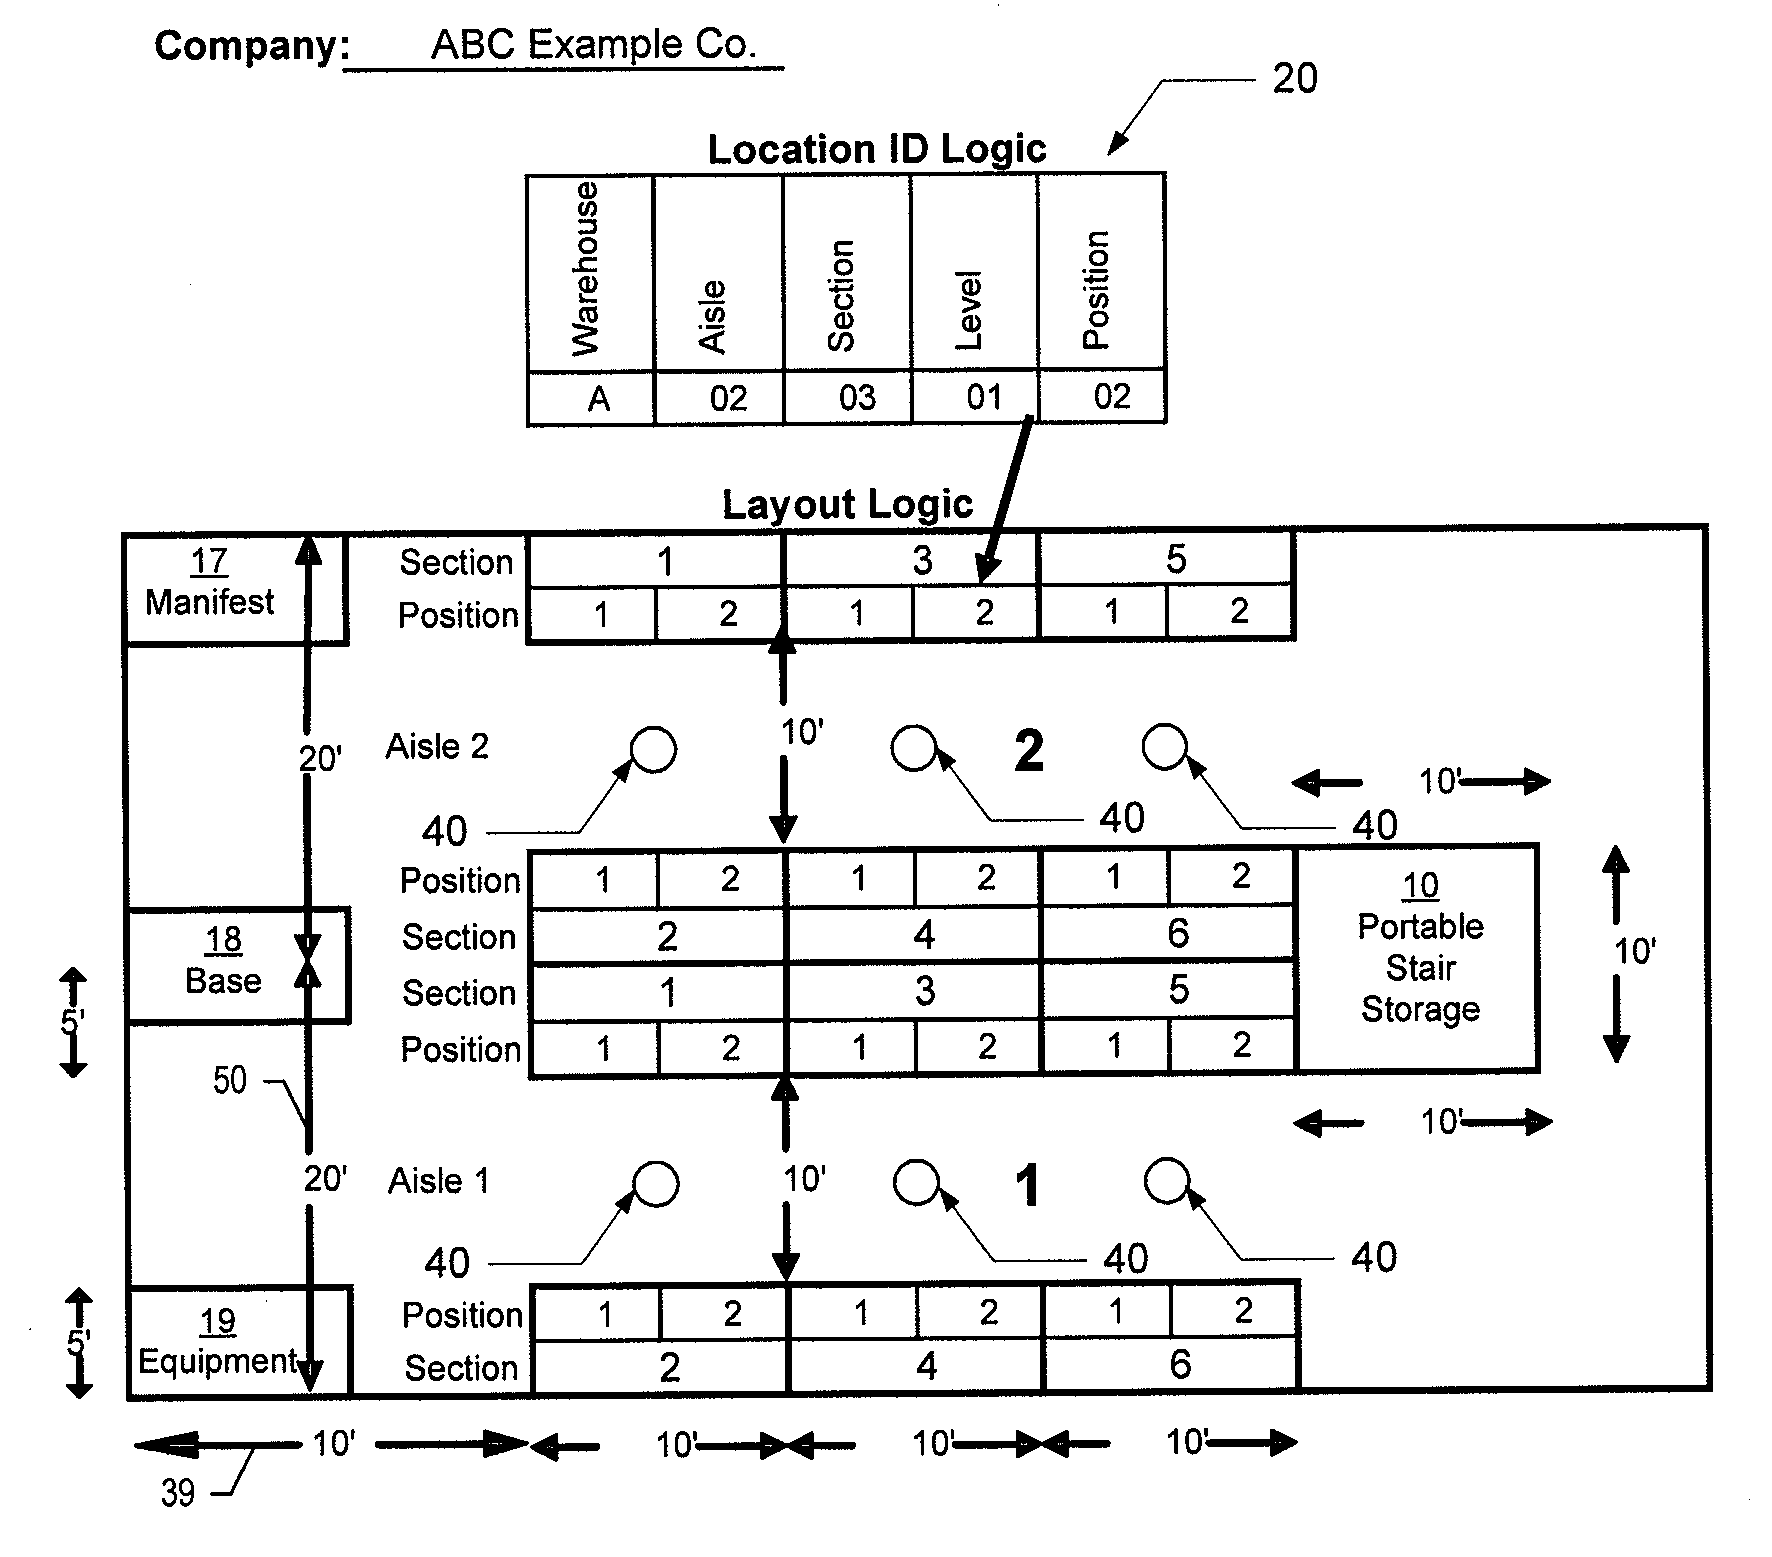 Systems, methods, apparatuses, and computer program products for determining productivity associated with retrieving items in a warehouse